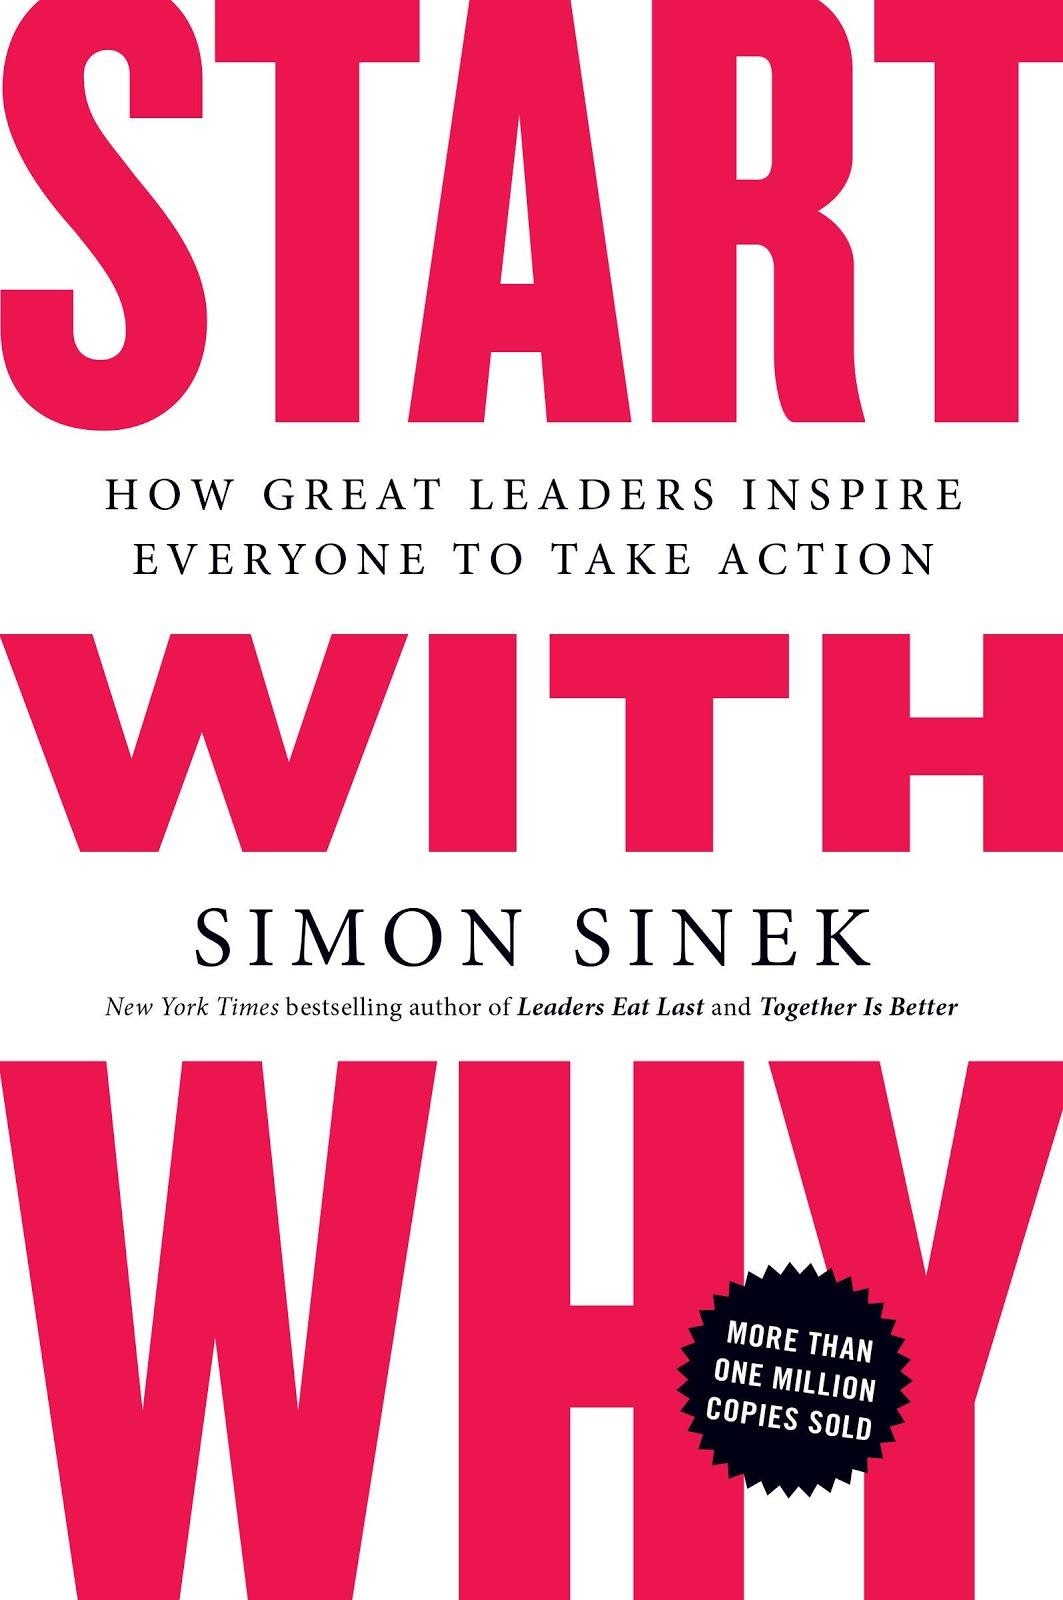 Book "Start With Why"